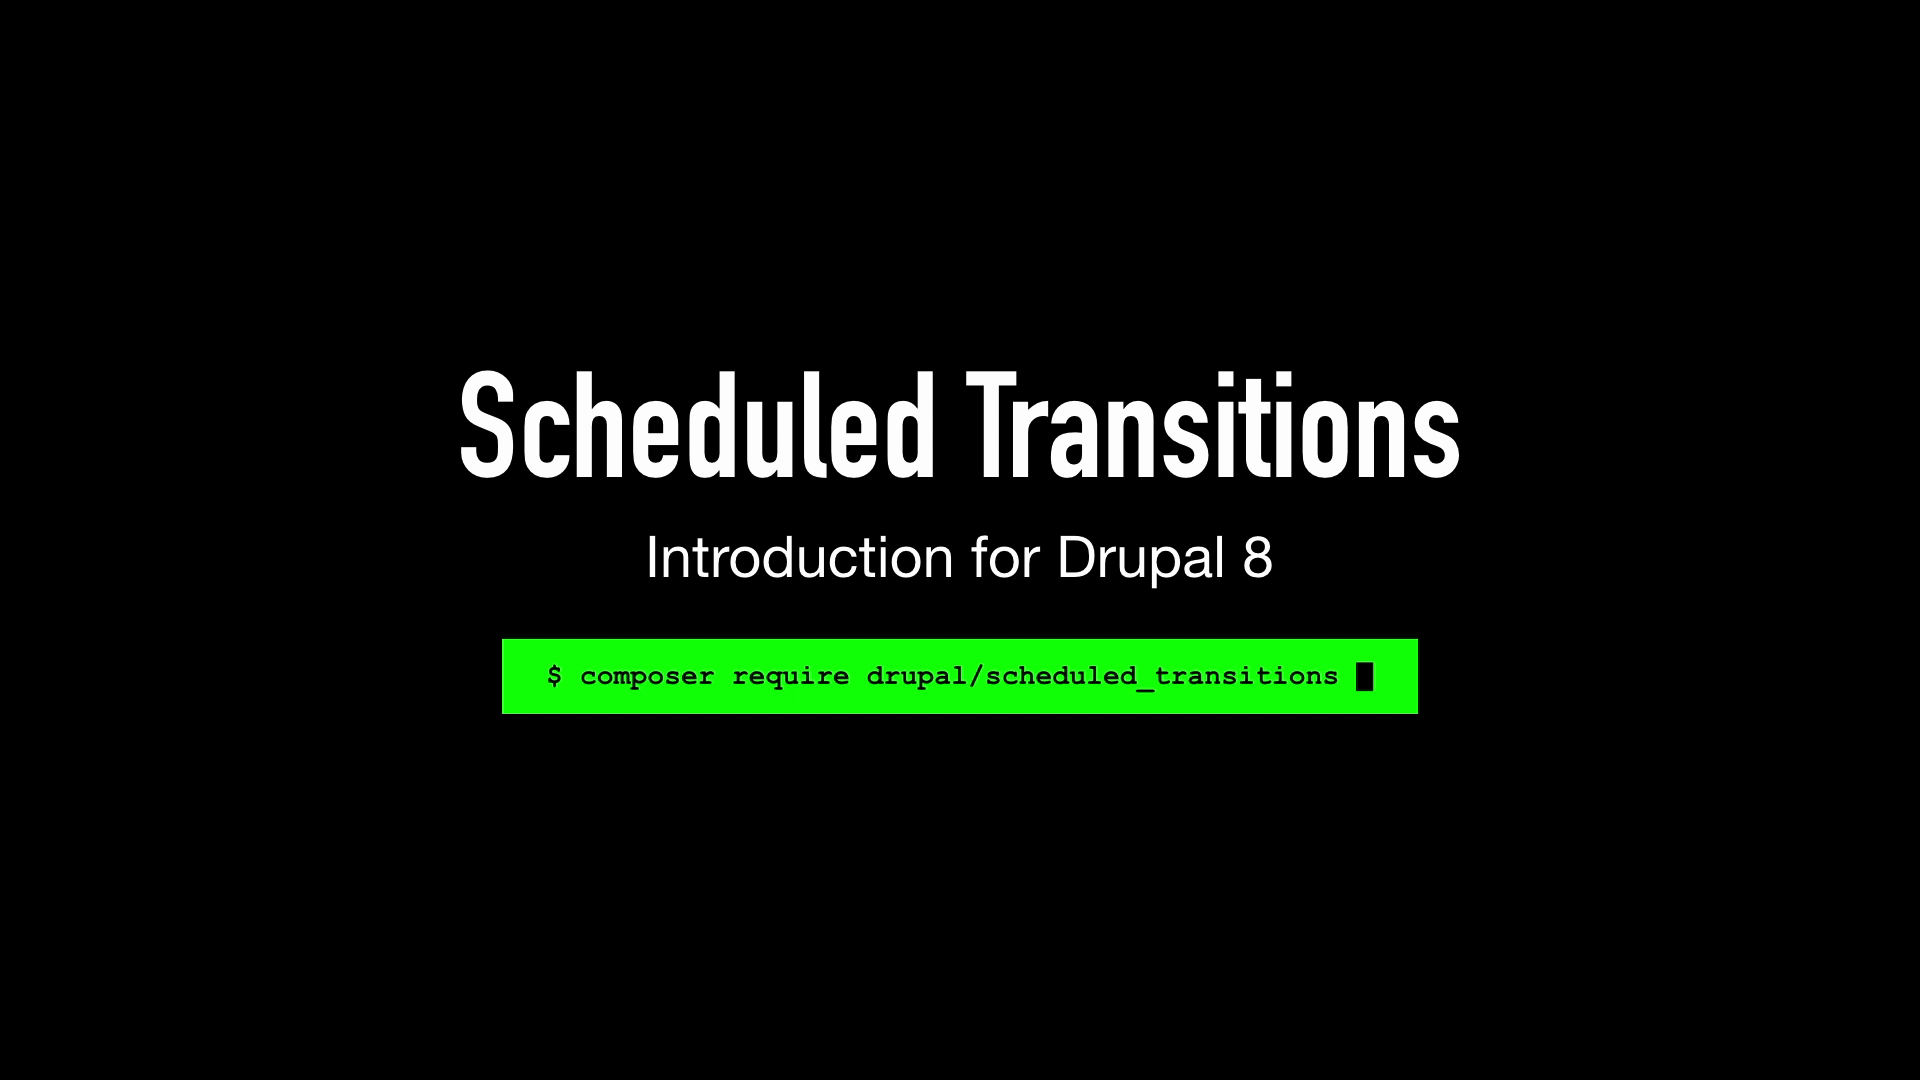 Introduction to Scheduled Transitions